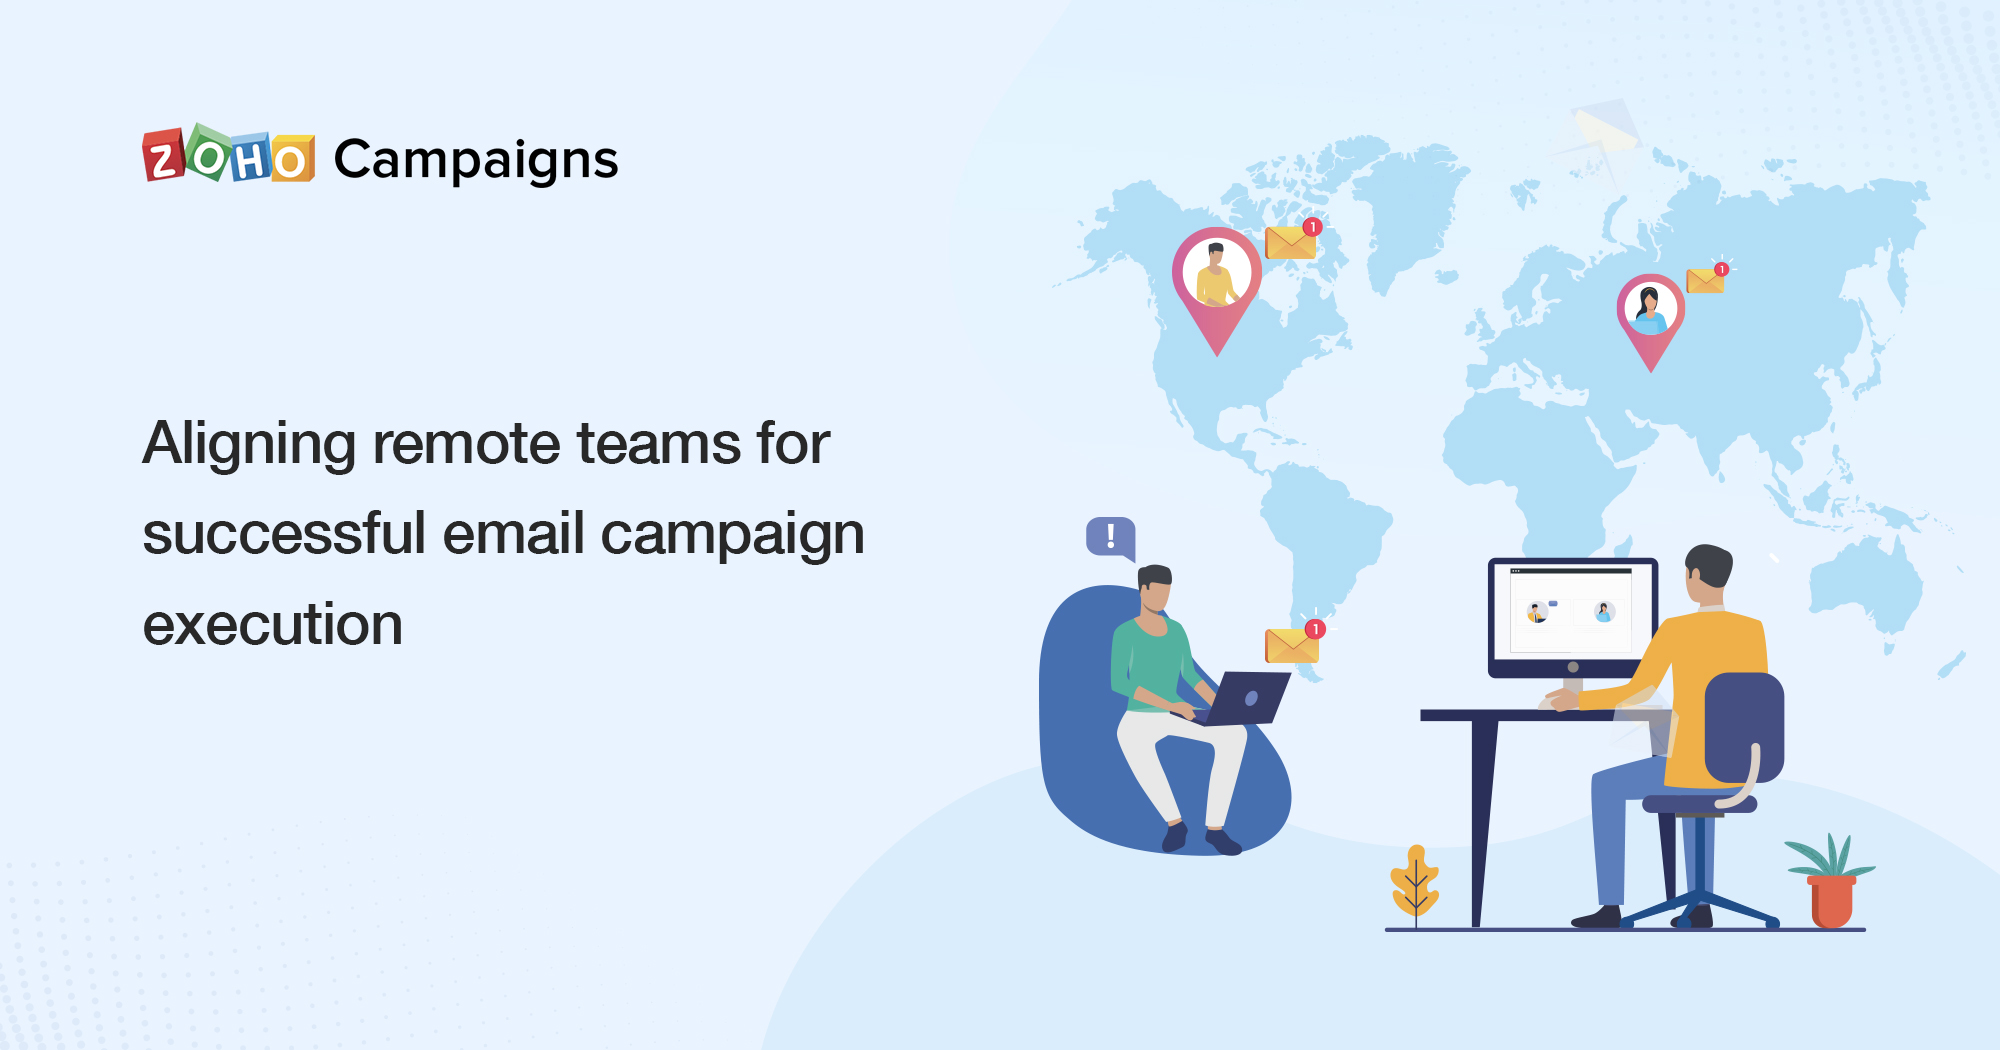 Aligning remote teams for successful email campaign execution